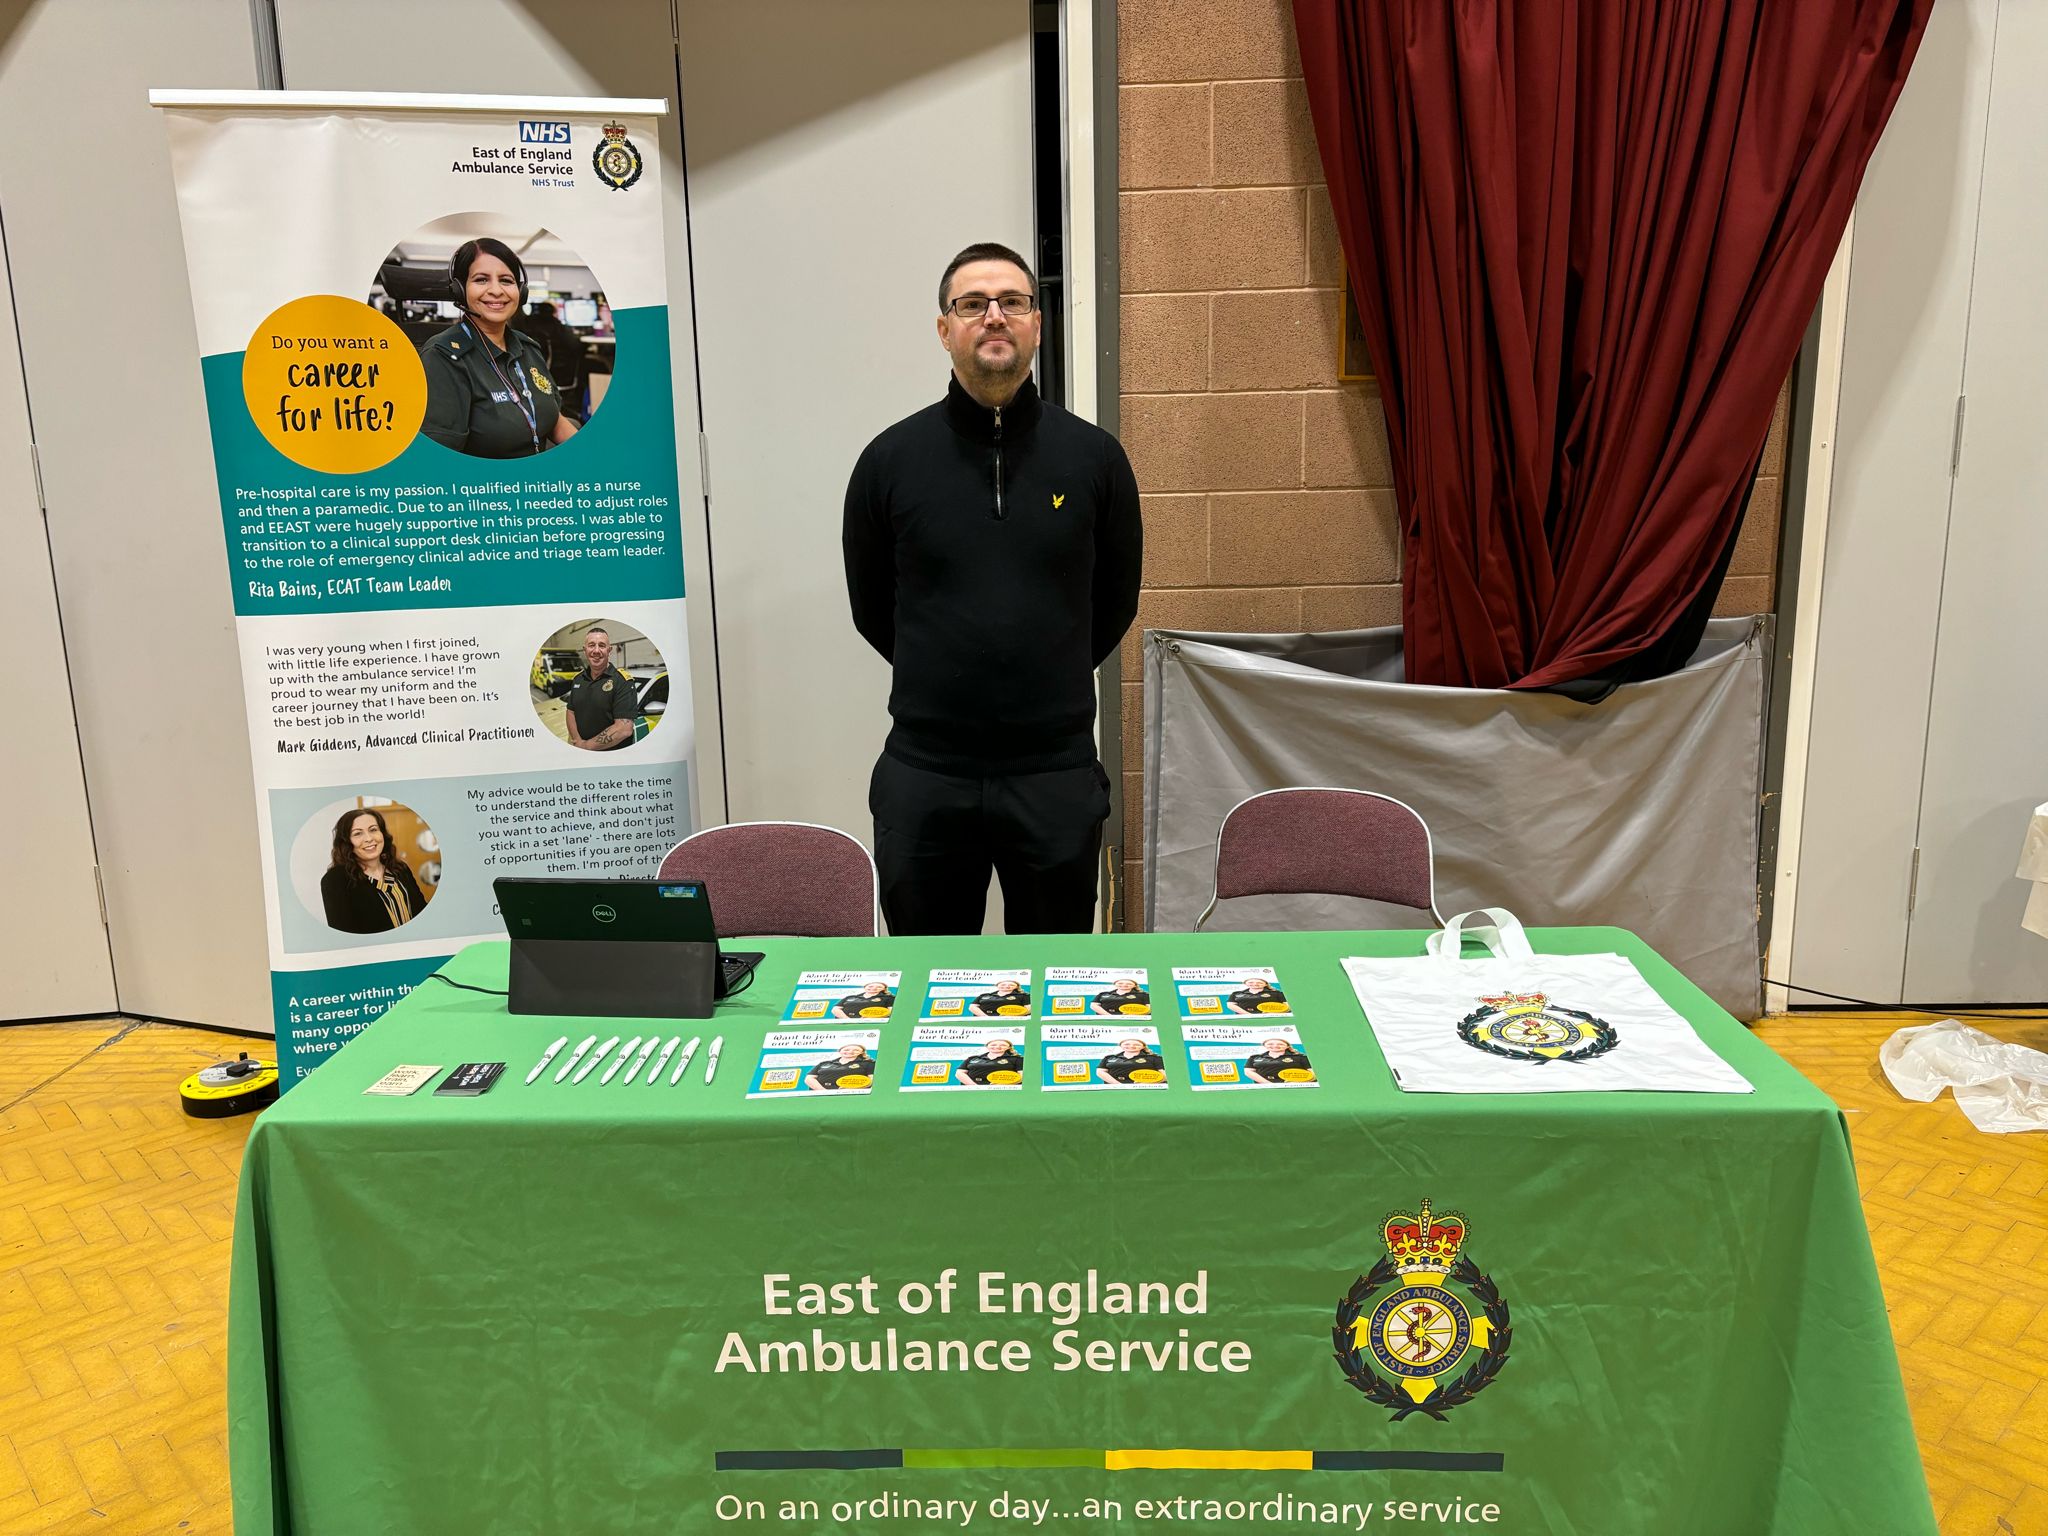 East of England Ambulance Service at our event in Colchester